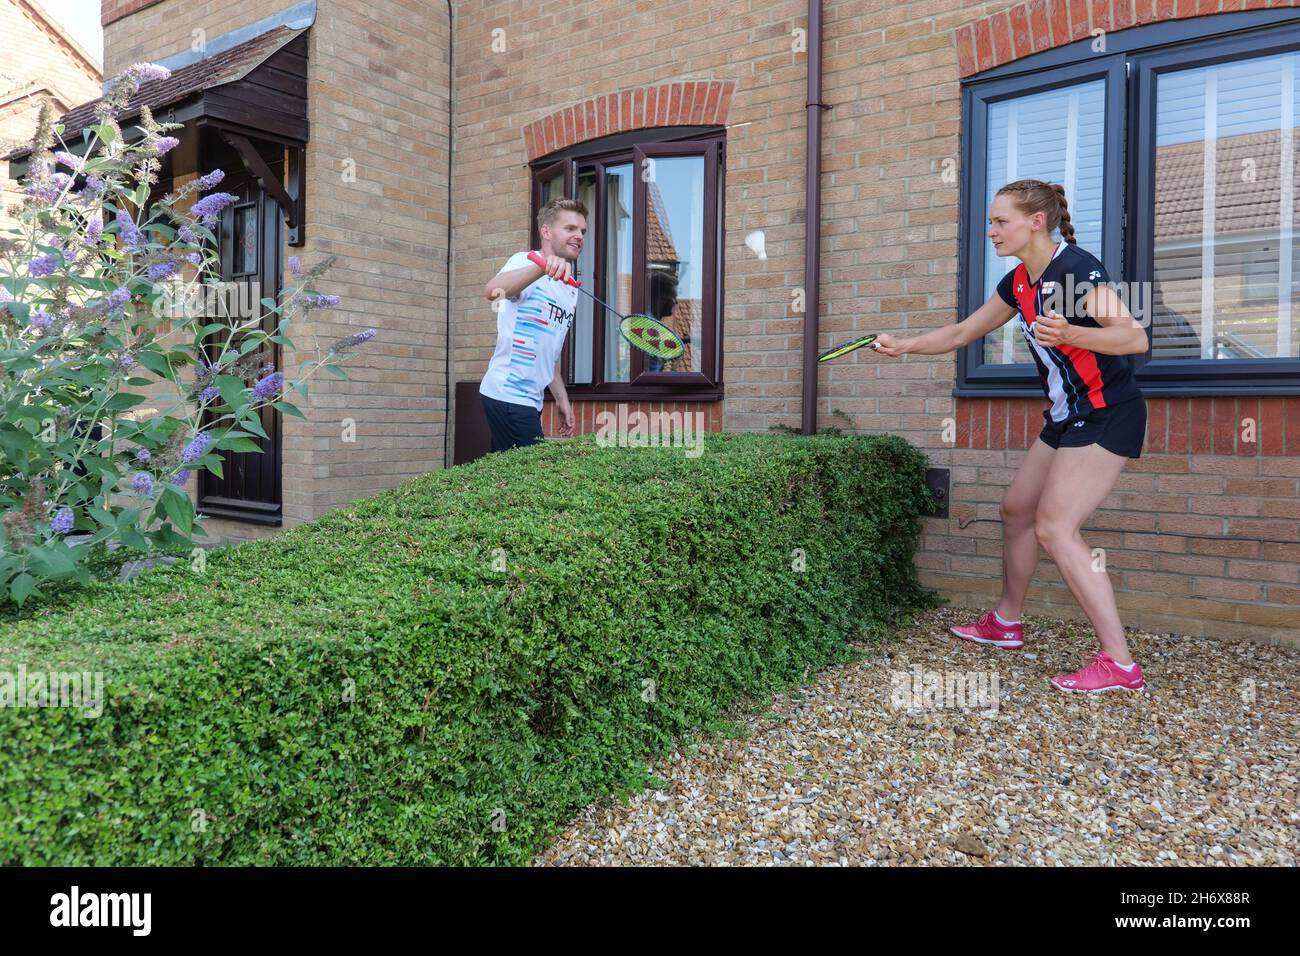 11/06/20 - Badminton England mixed doubles players Marcus Ellis and Lauren Smith playing badminton at home following Covid-19 lockdown. Stock Photo